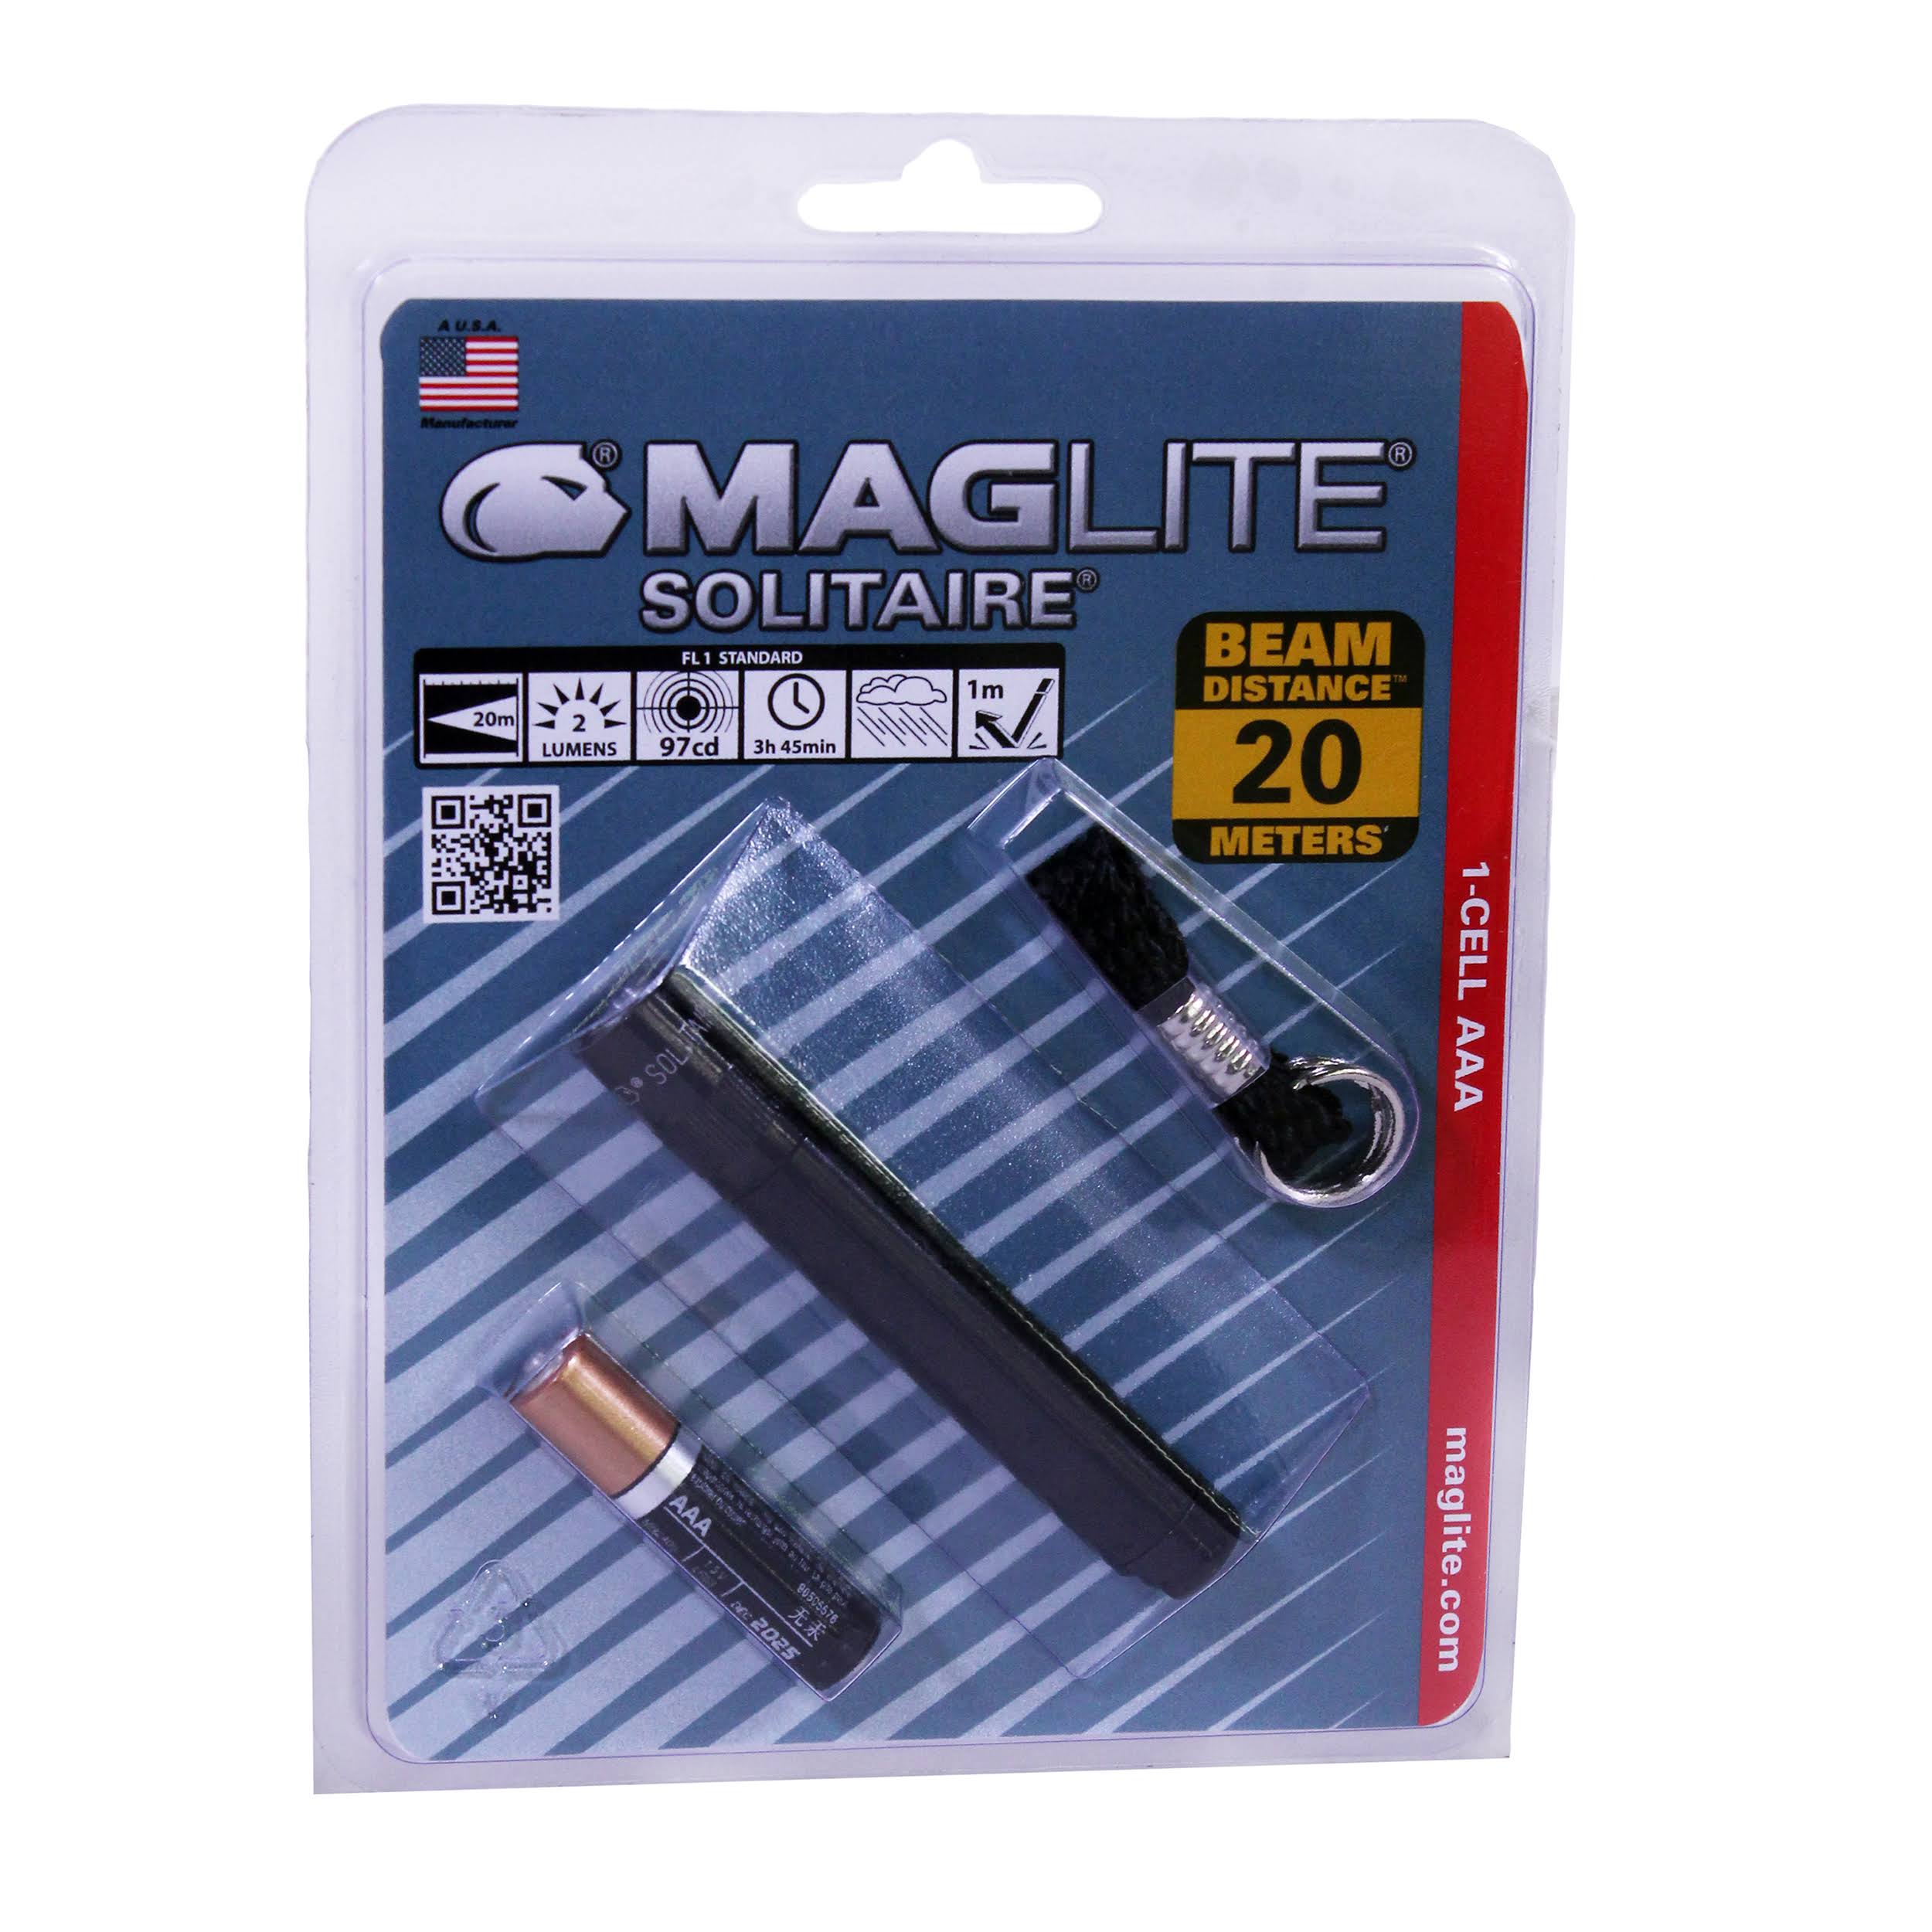 Maglite Solitaire Flashlight - Single Cell AAA